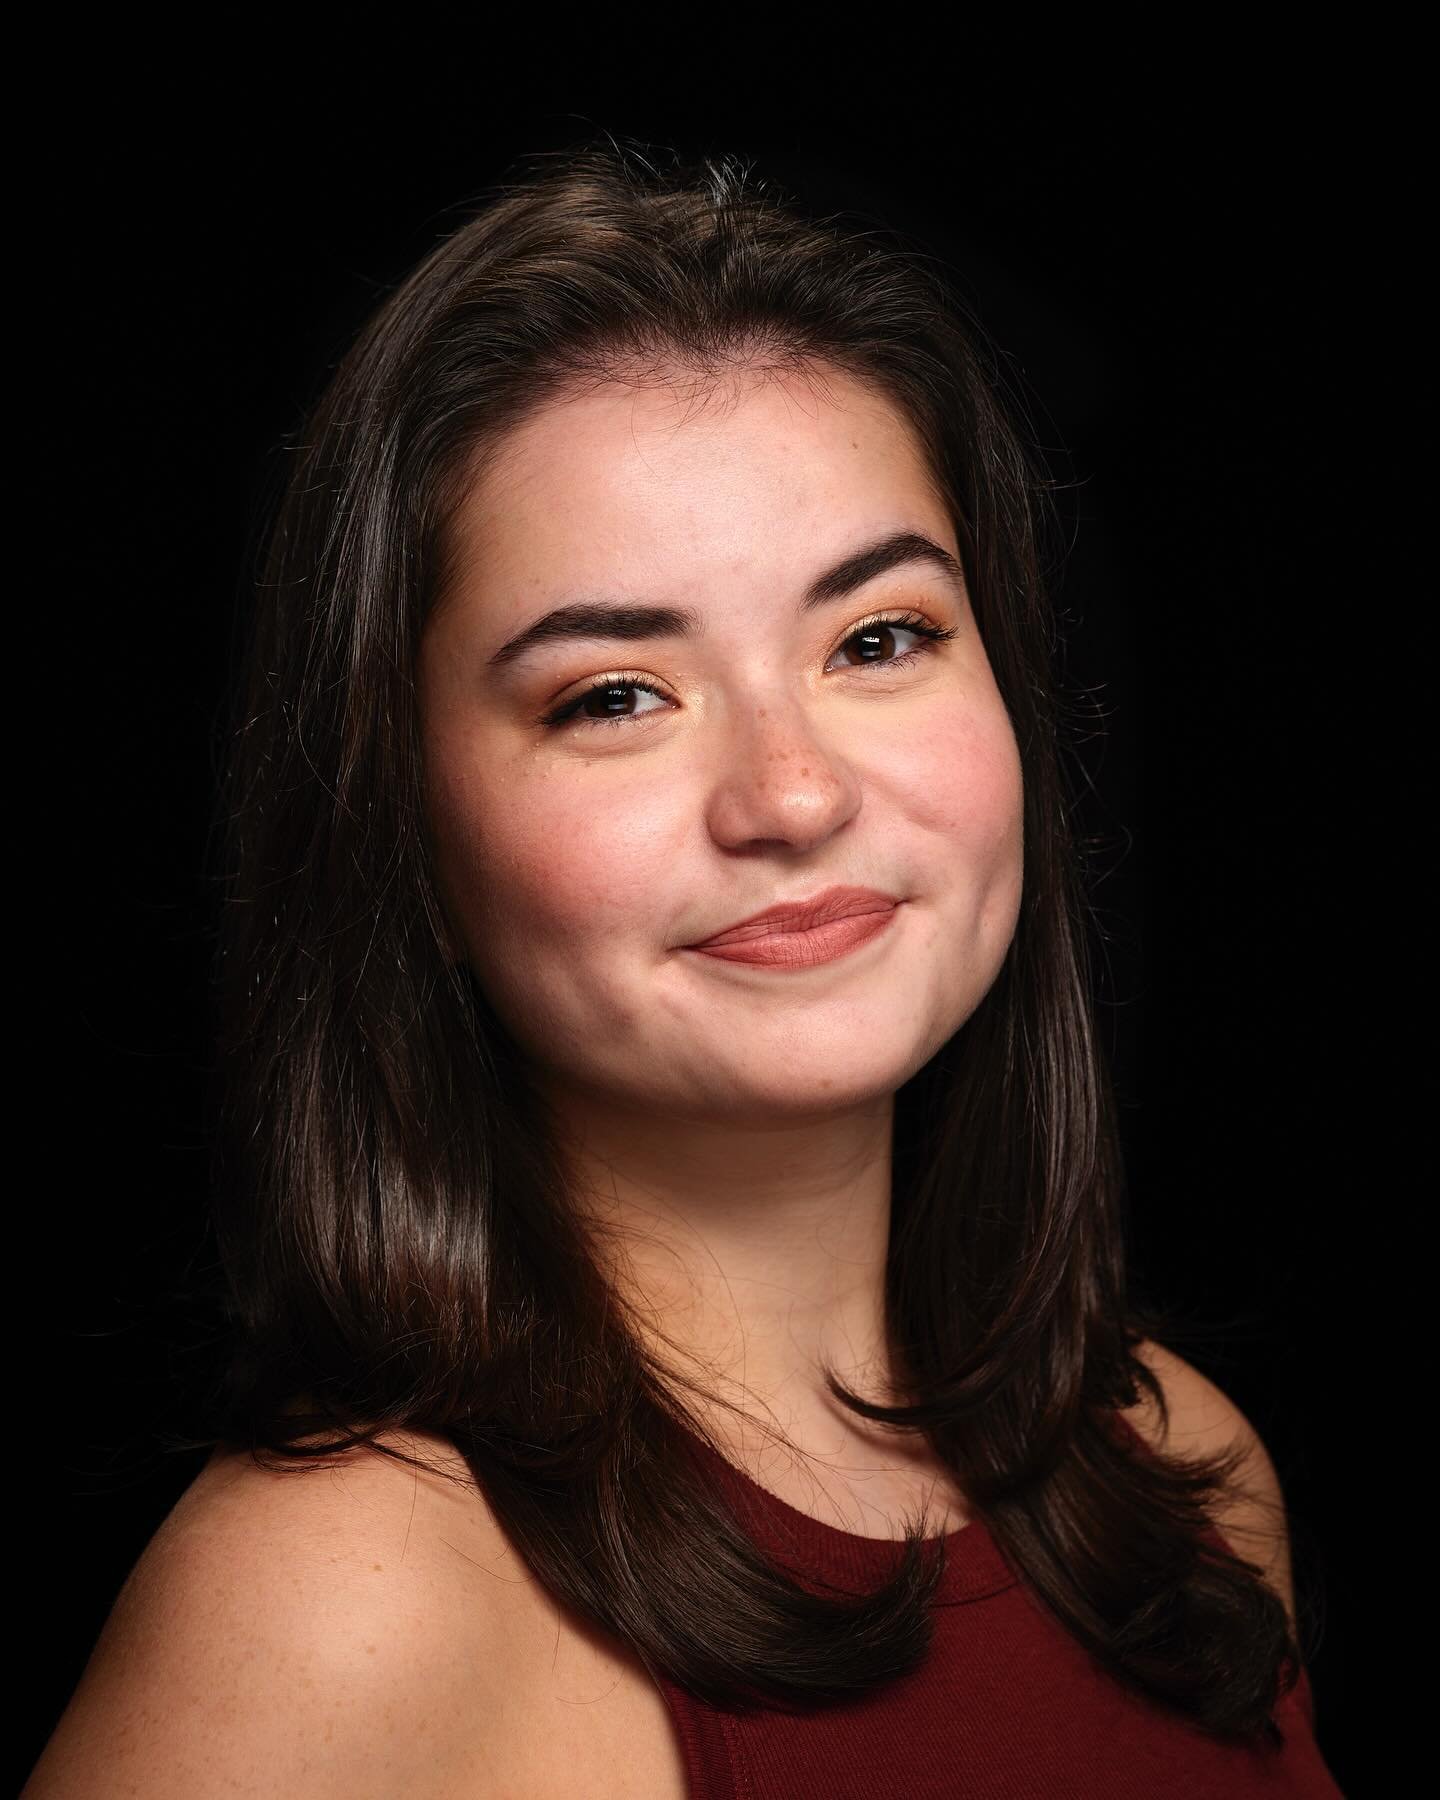 We are excited to introduce another new Artichoke Dance Company member! Help us give a warm welcome to Ava Rakowski @ava_rakowski 

Ava Rakowski (she/her) is a dancer, writer, choreographer, and teacher originally from Lyndhurst, NJ. Rakowski recentl